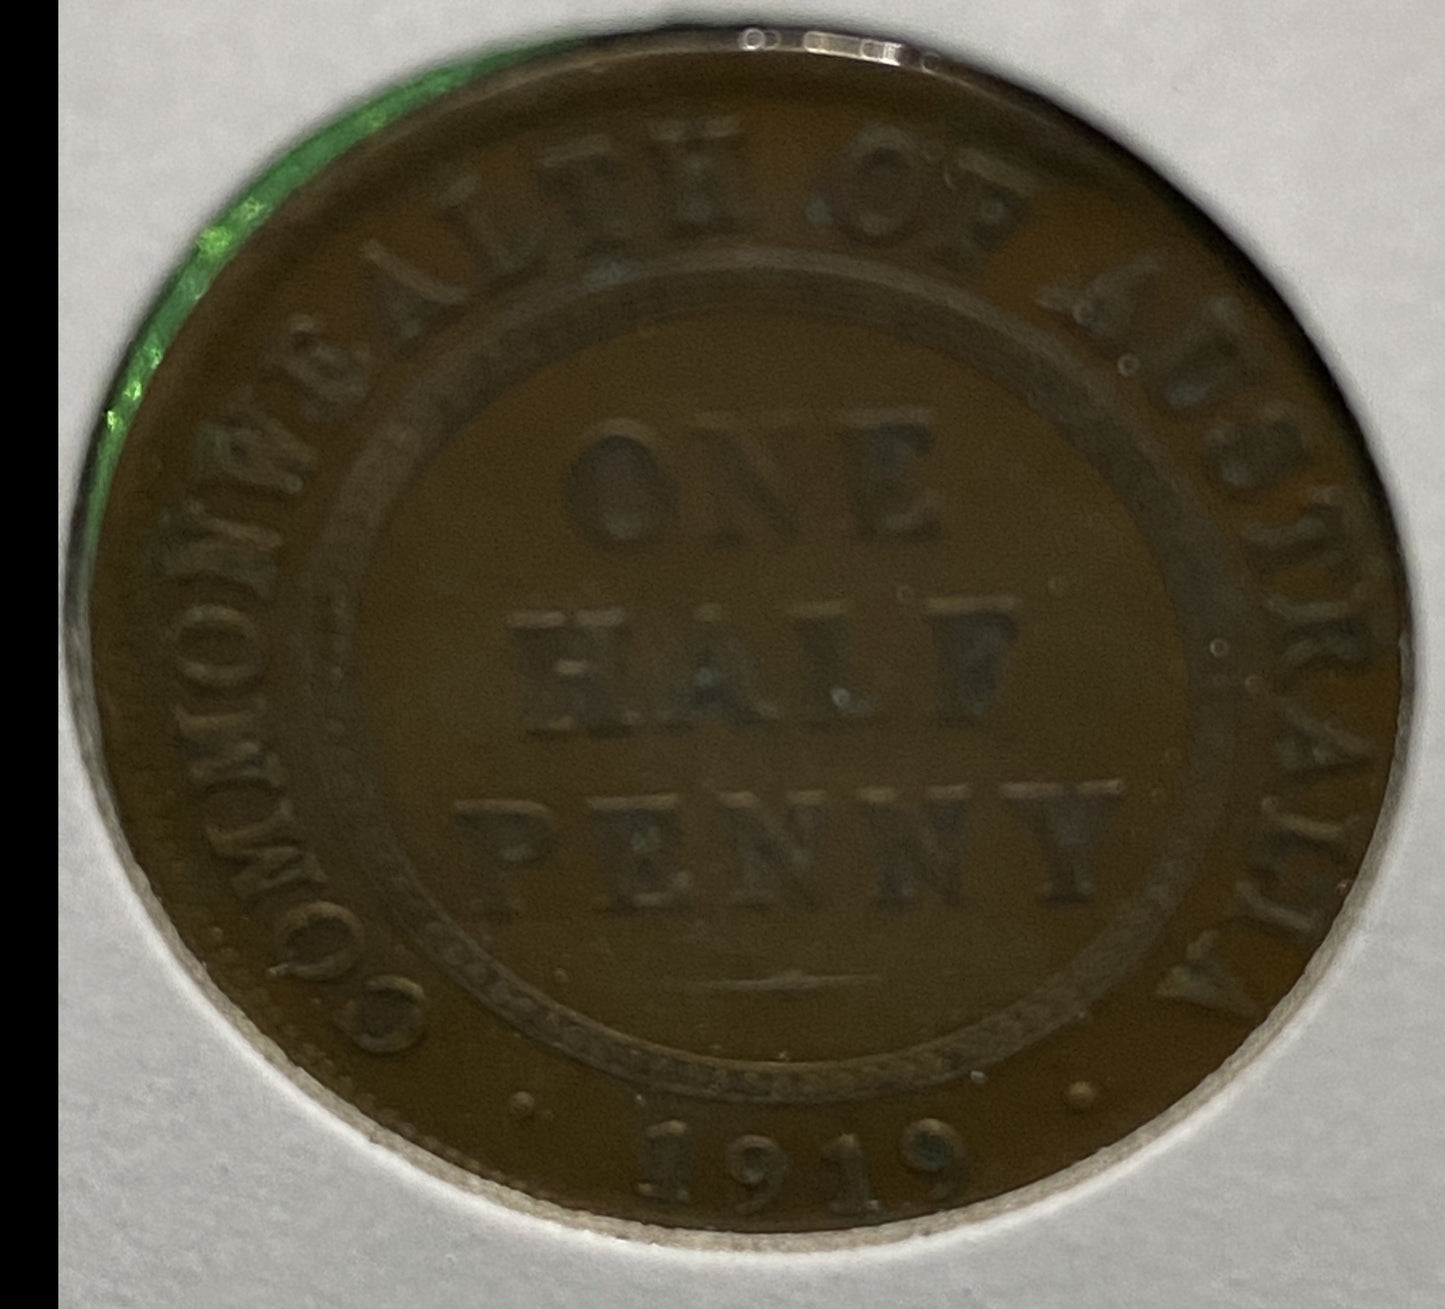 Australian HALF PENNY COIN 1919 KING GEORGE V ( G/VG ) CONDITION